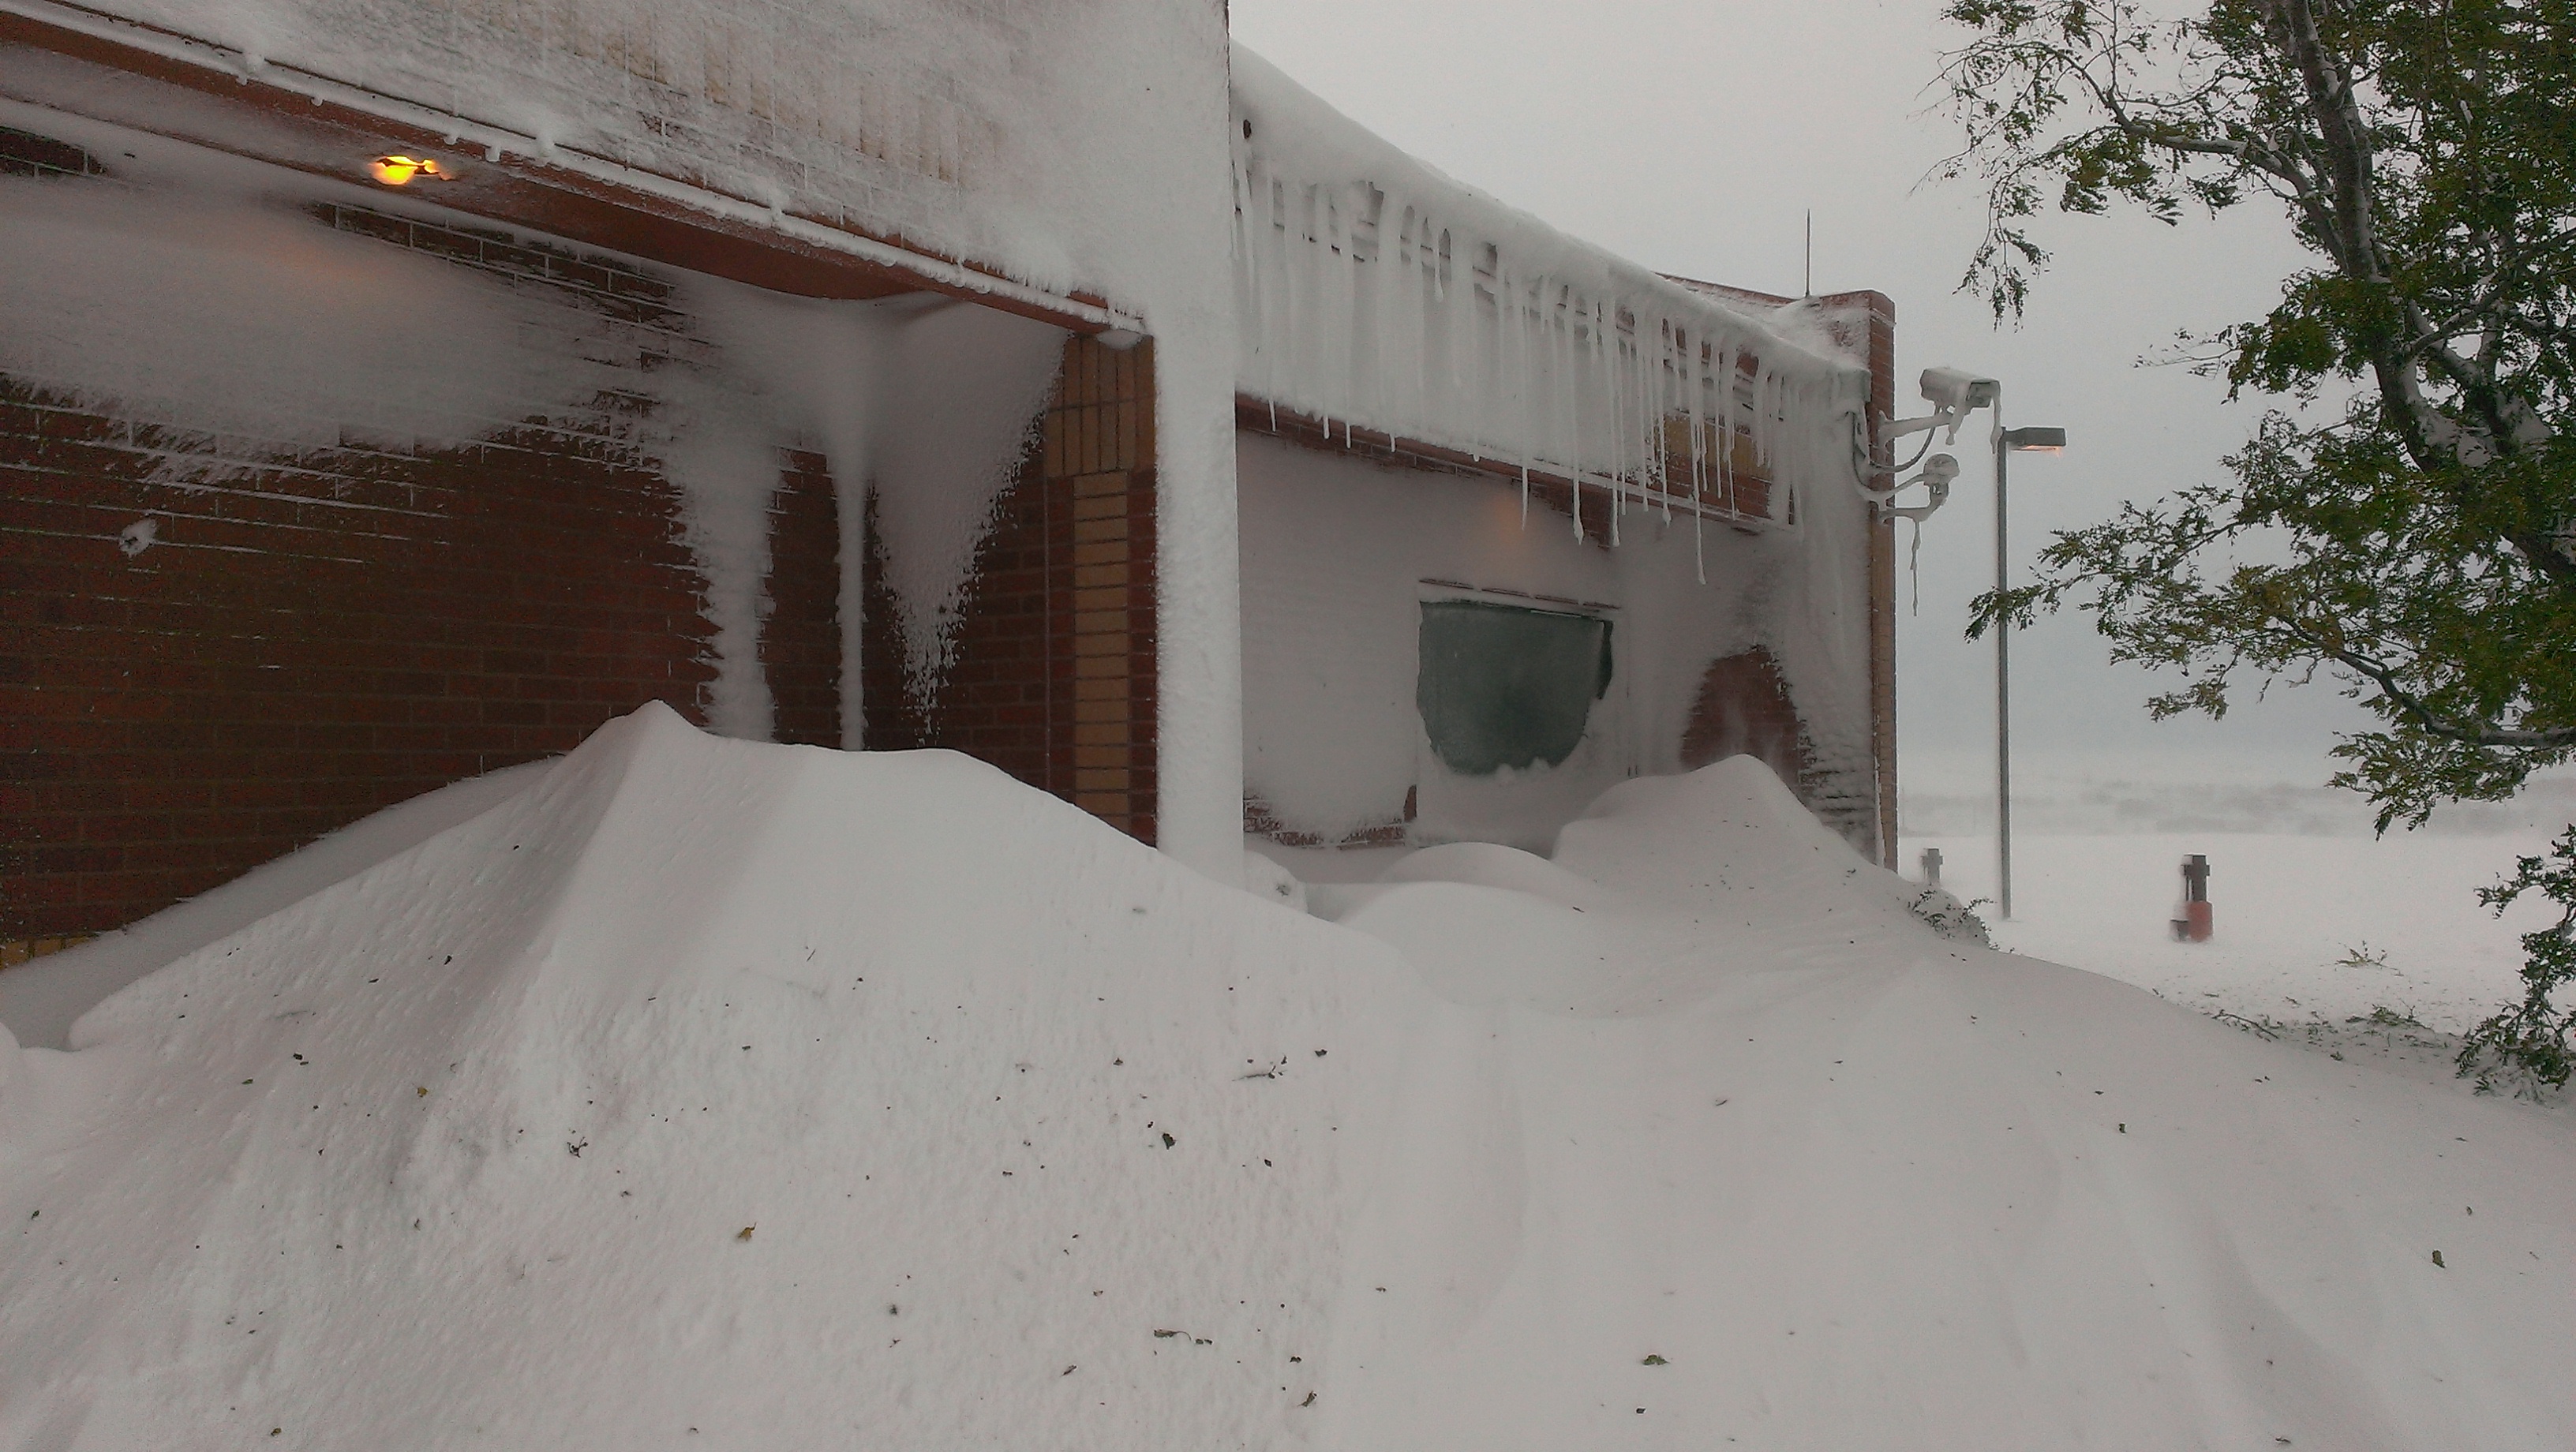 The Rapid City National Weather Service office after the blizzard.